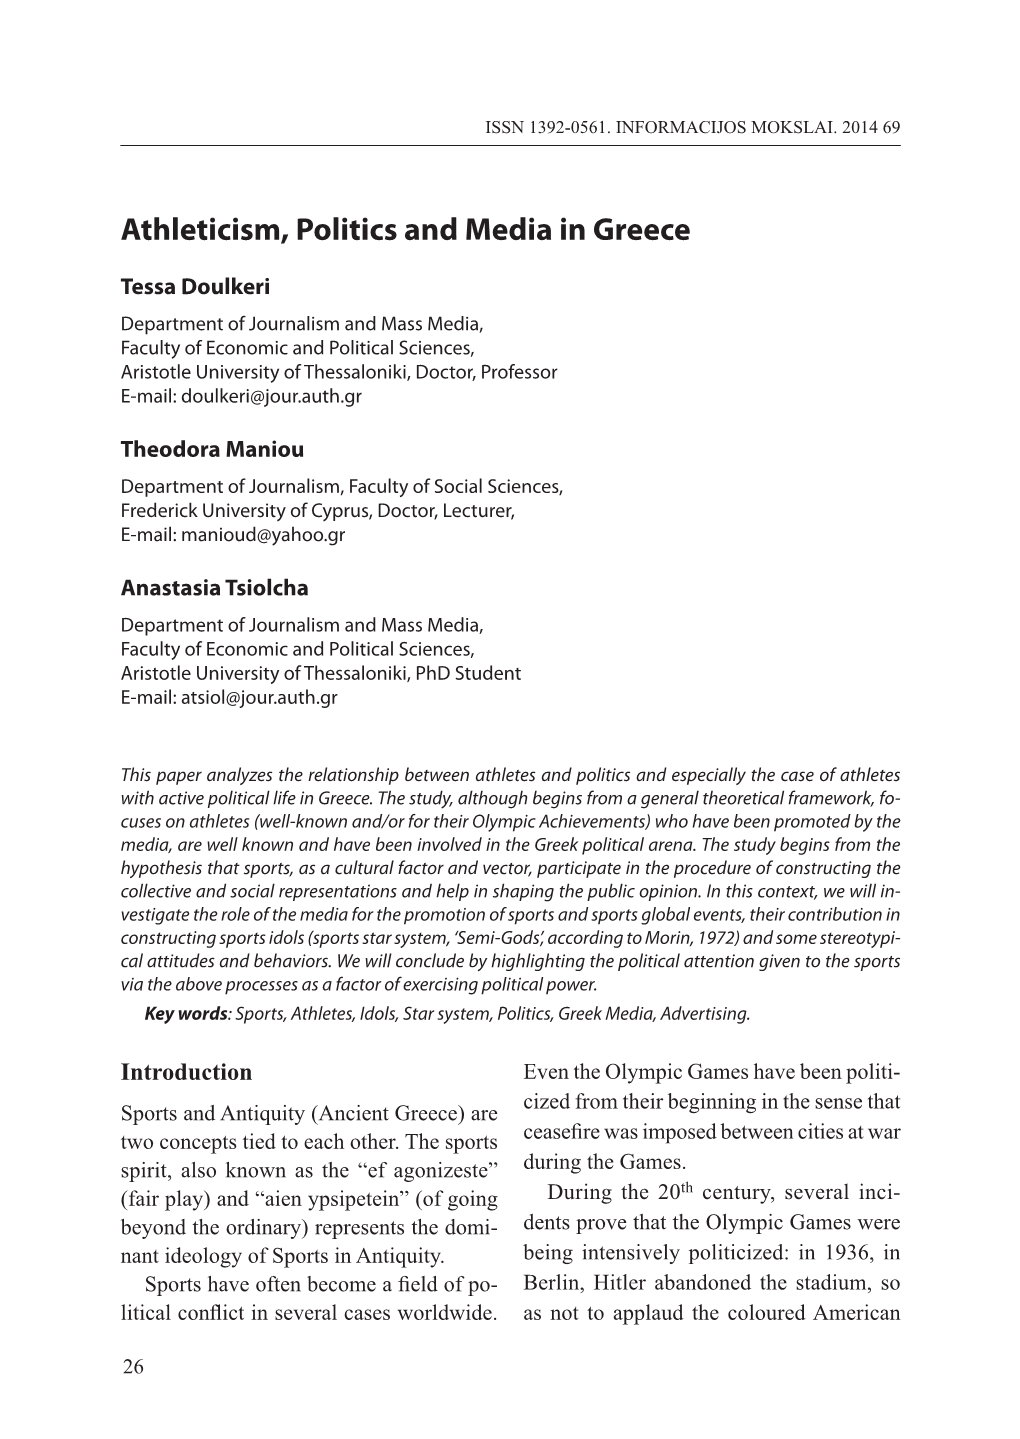 Athleticism, Politics and Media in Greece